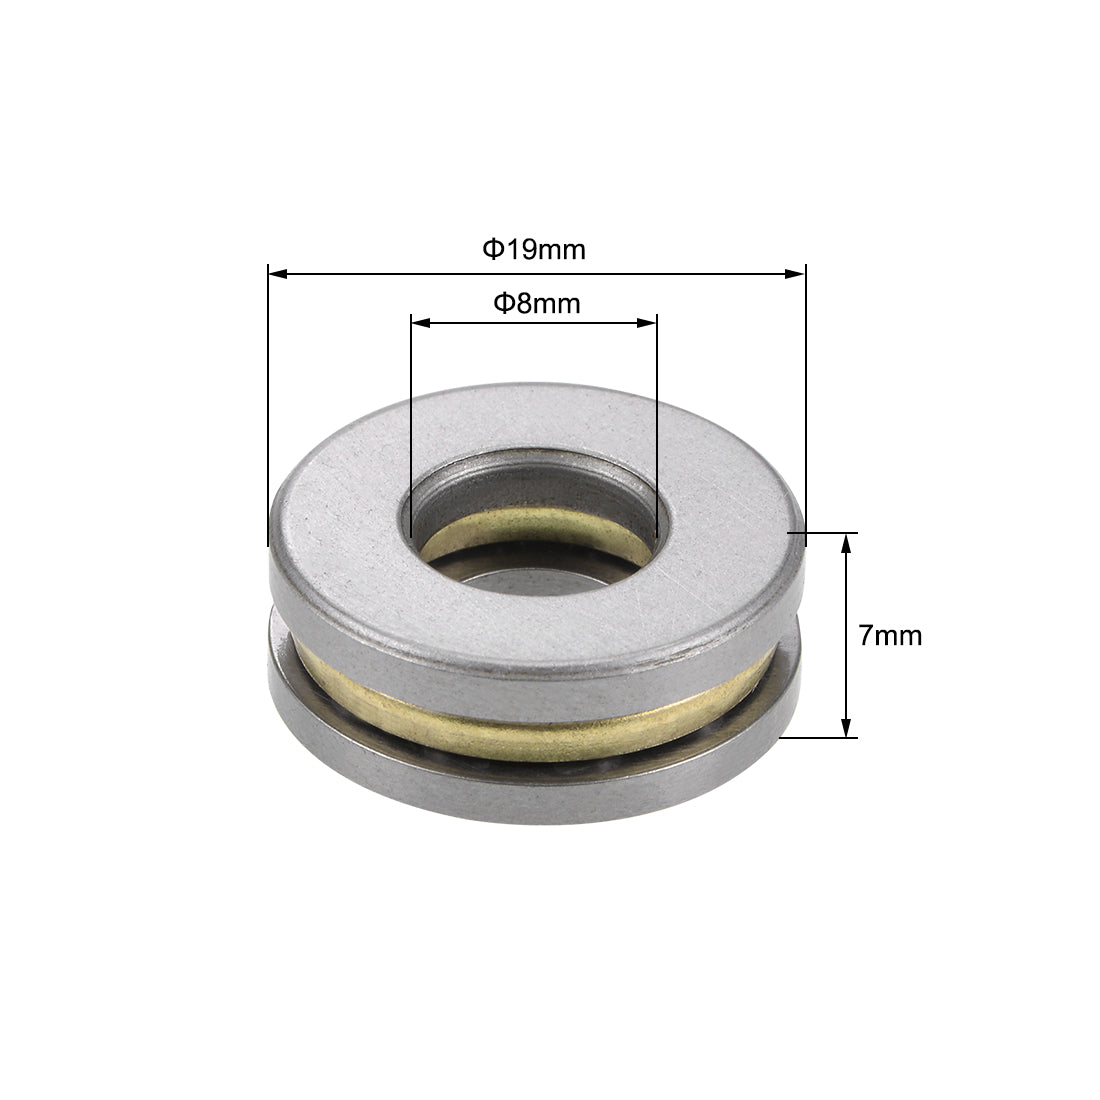 uxcell Uxcell Thrust Ball Bearings Chrome Steel One-Way Rolling Direction Brass